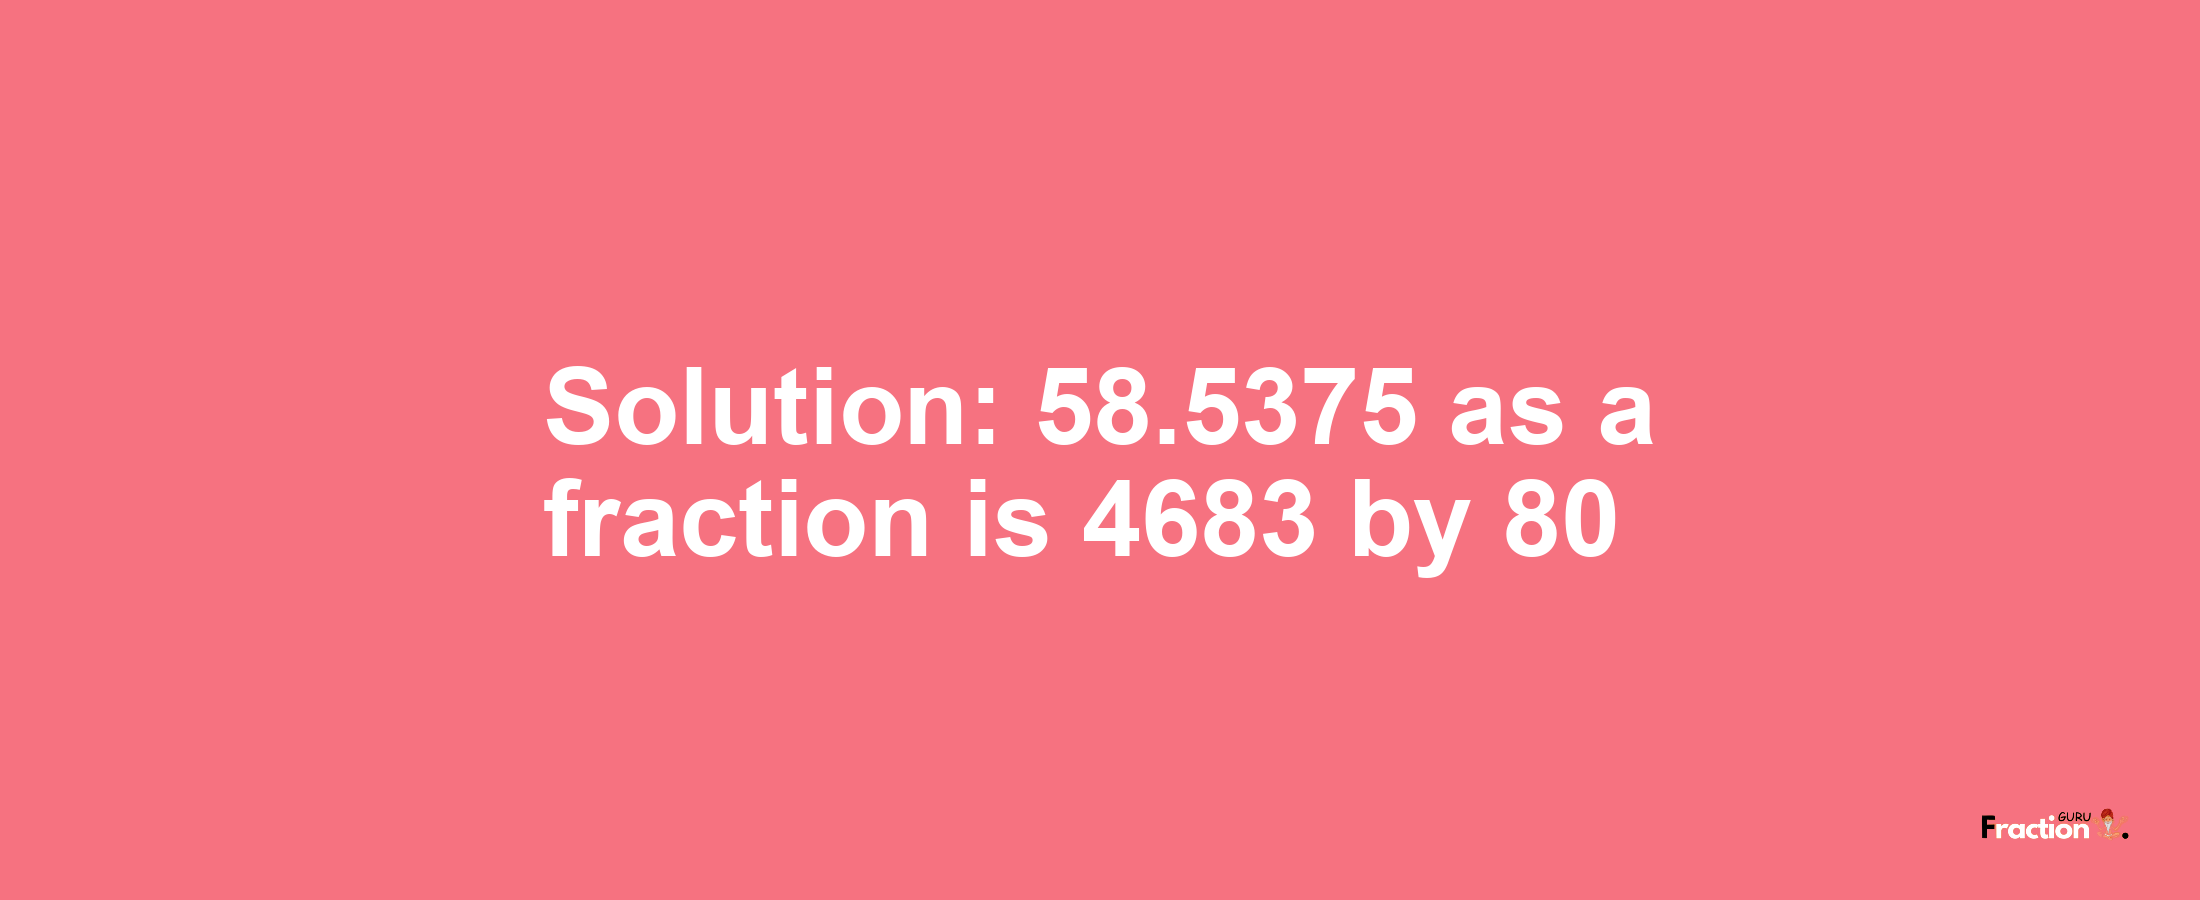 Solution:58.5375 as a fraction is 4683/80